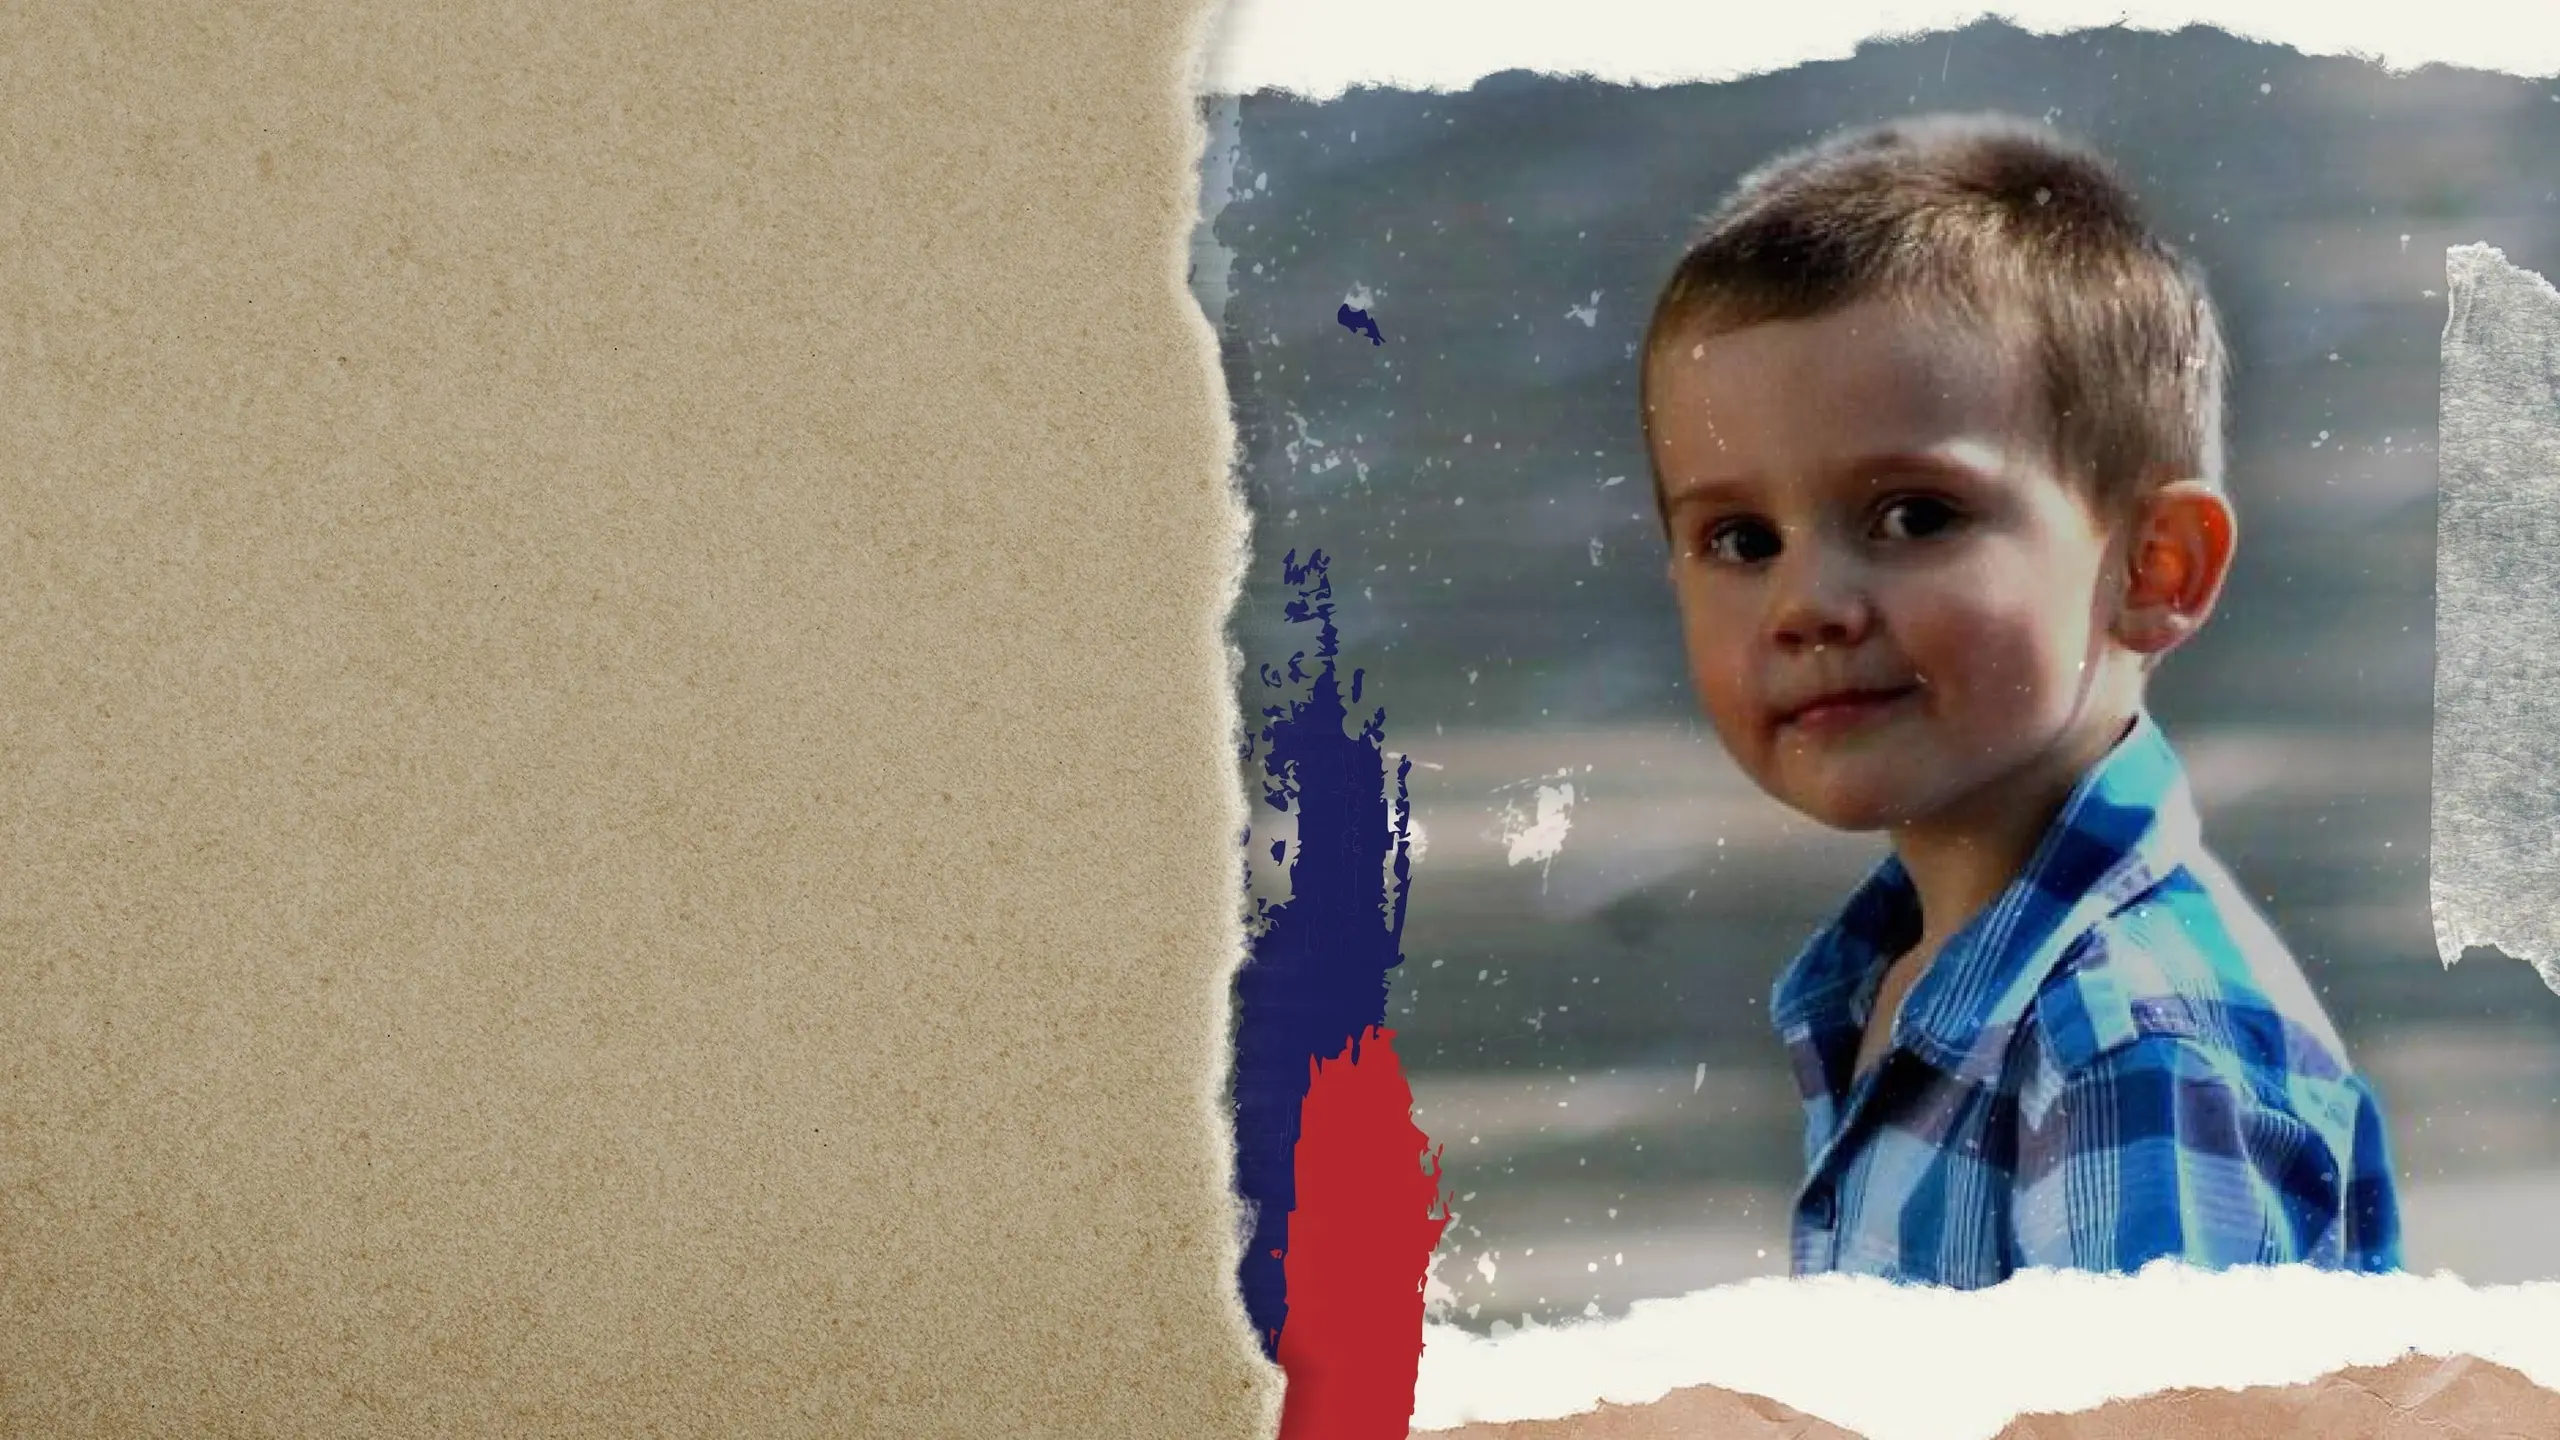 The Disappearance of William Tyrrell